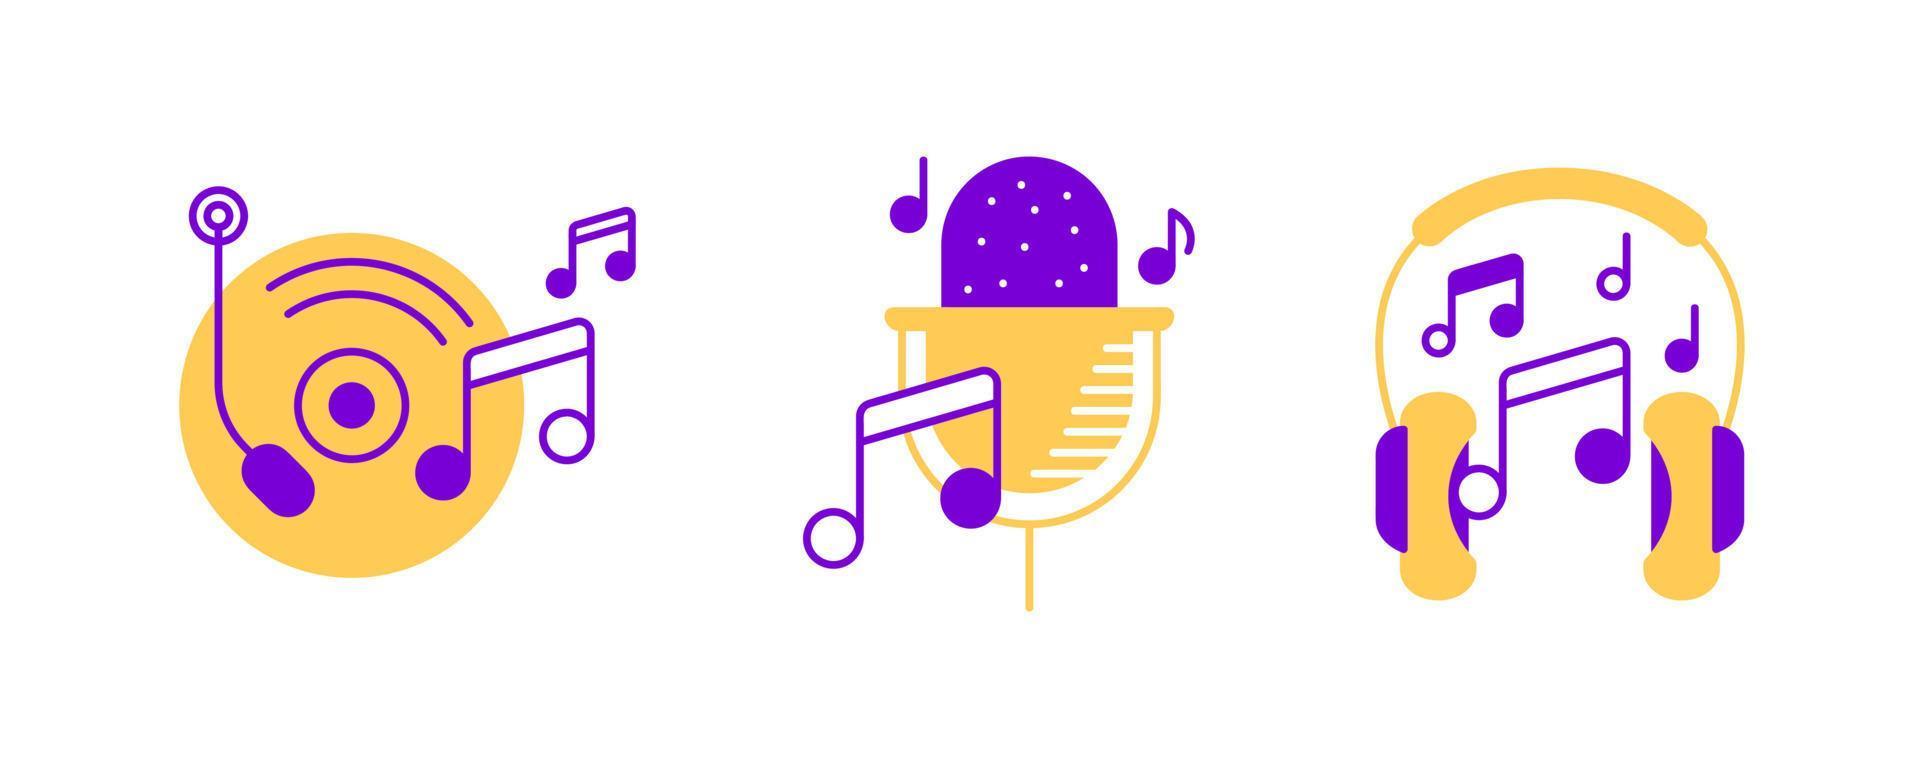 Gramophone, microphone, headphones and musical note icon set. Entertainment and music icon. Art vector illustration set. Editable row set. Colorful icon set.